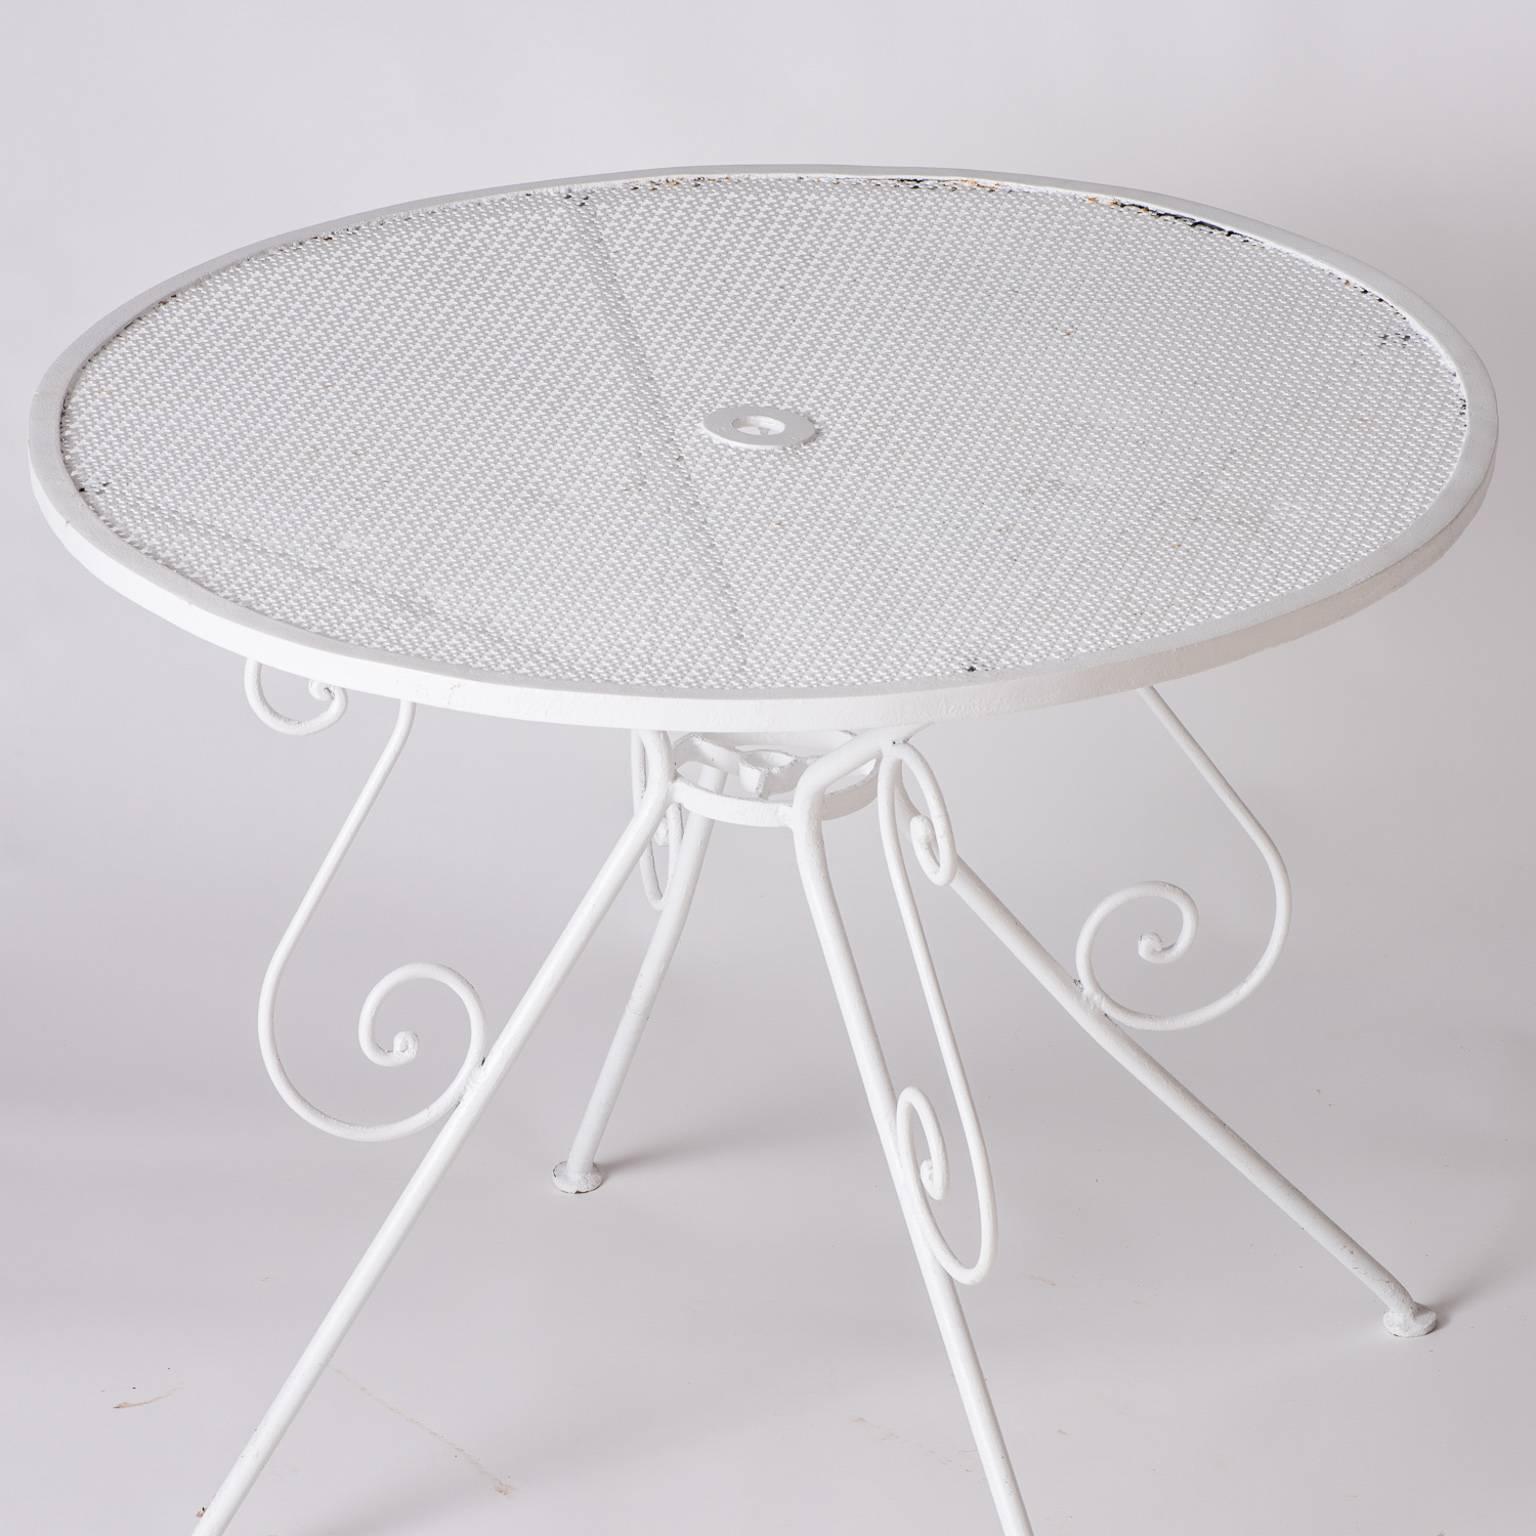 A French wrought iron garden table with a pierced top and an umbrella hole in the center, circa 1950. It is in great condition and has been recently painted with weather resistant paint.

Measures: 29” high
35” diameter.